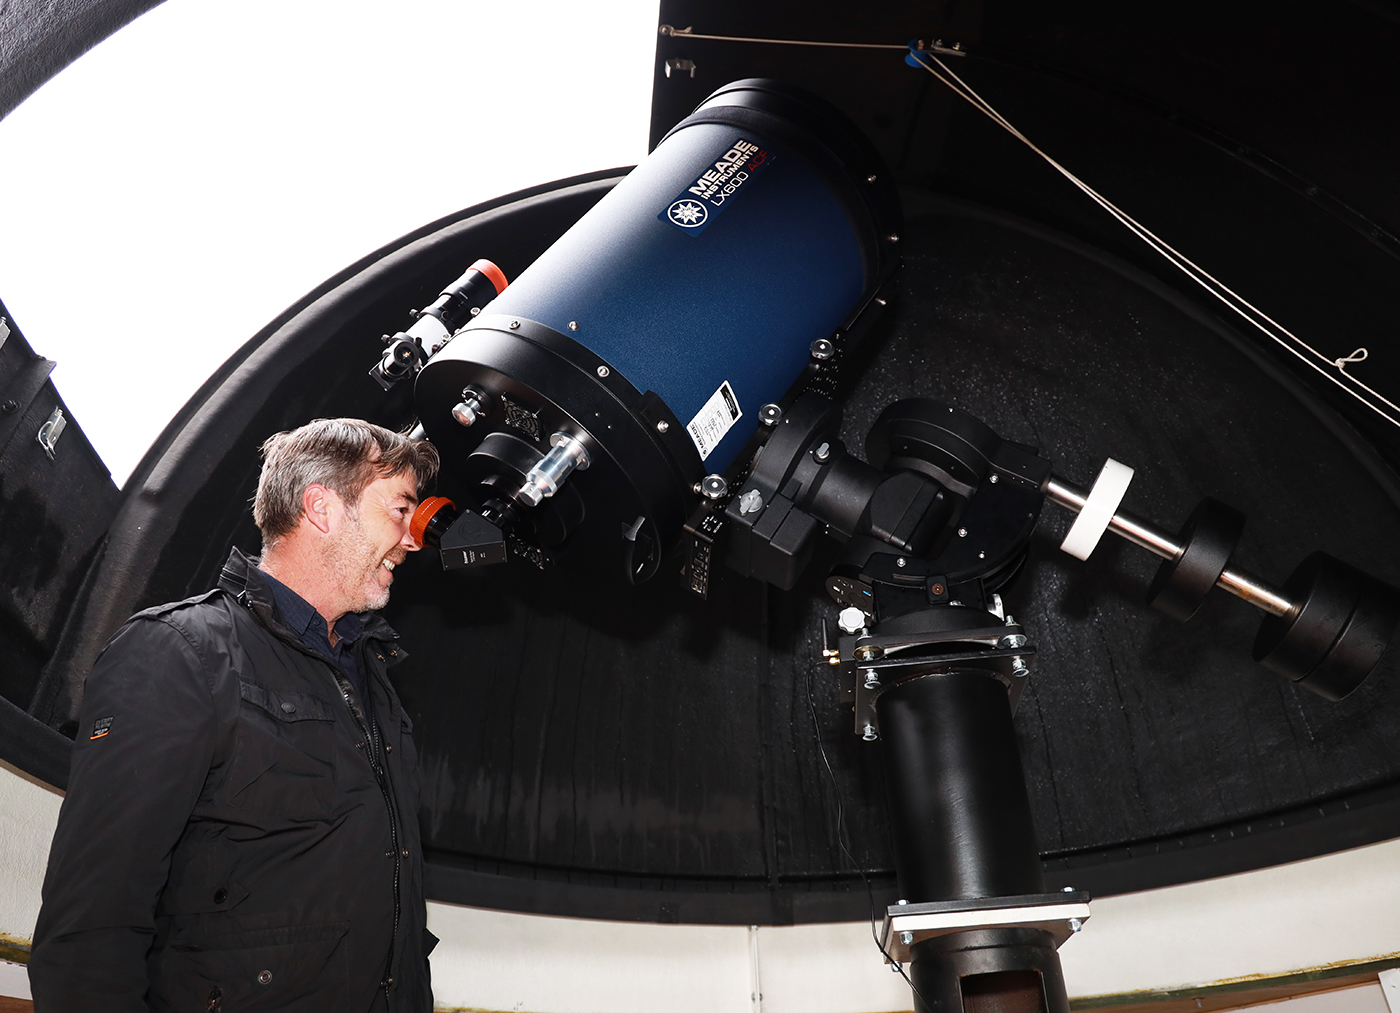 Community observatory opens in Moffat